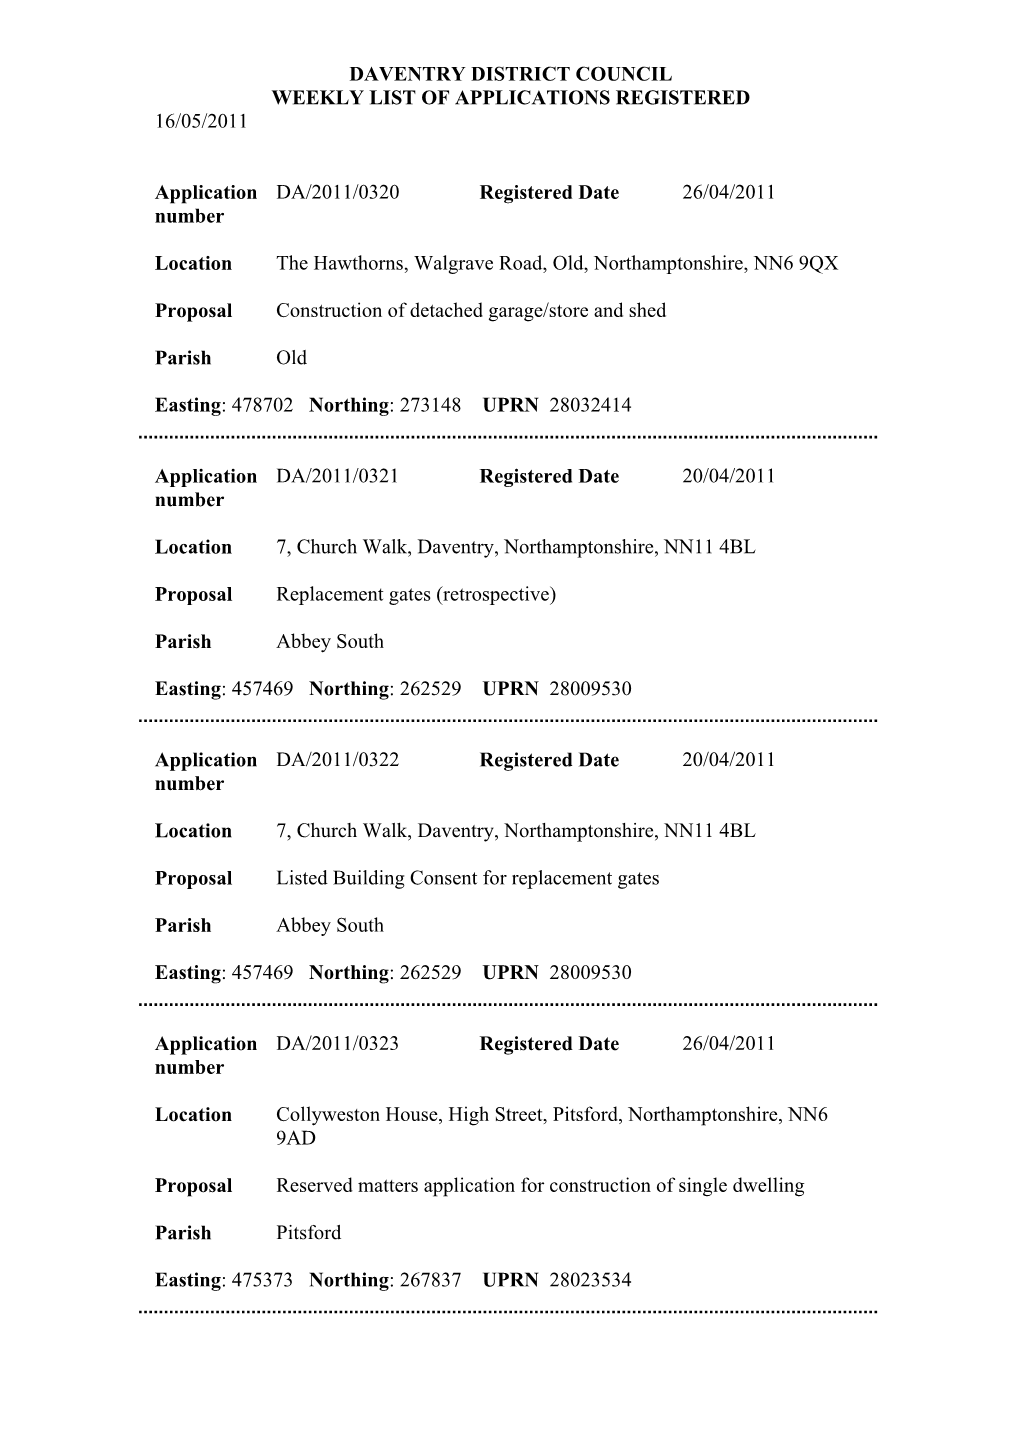 Daventry District Council Weekly List of Applications Registered 16/05/2011